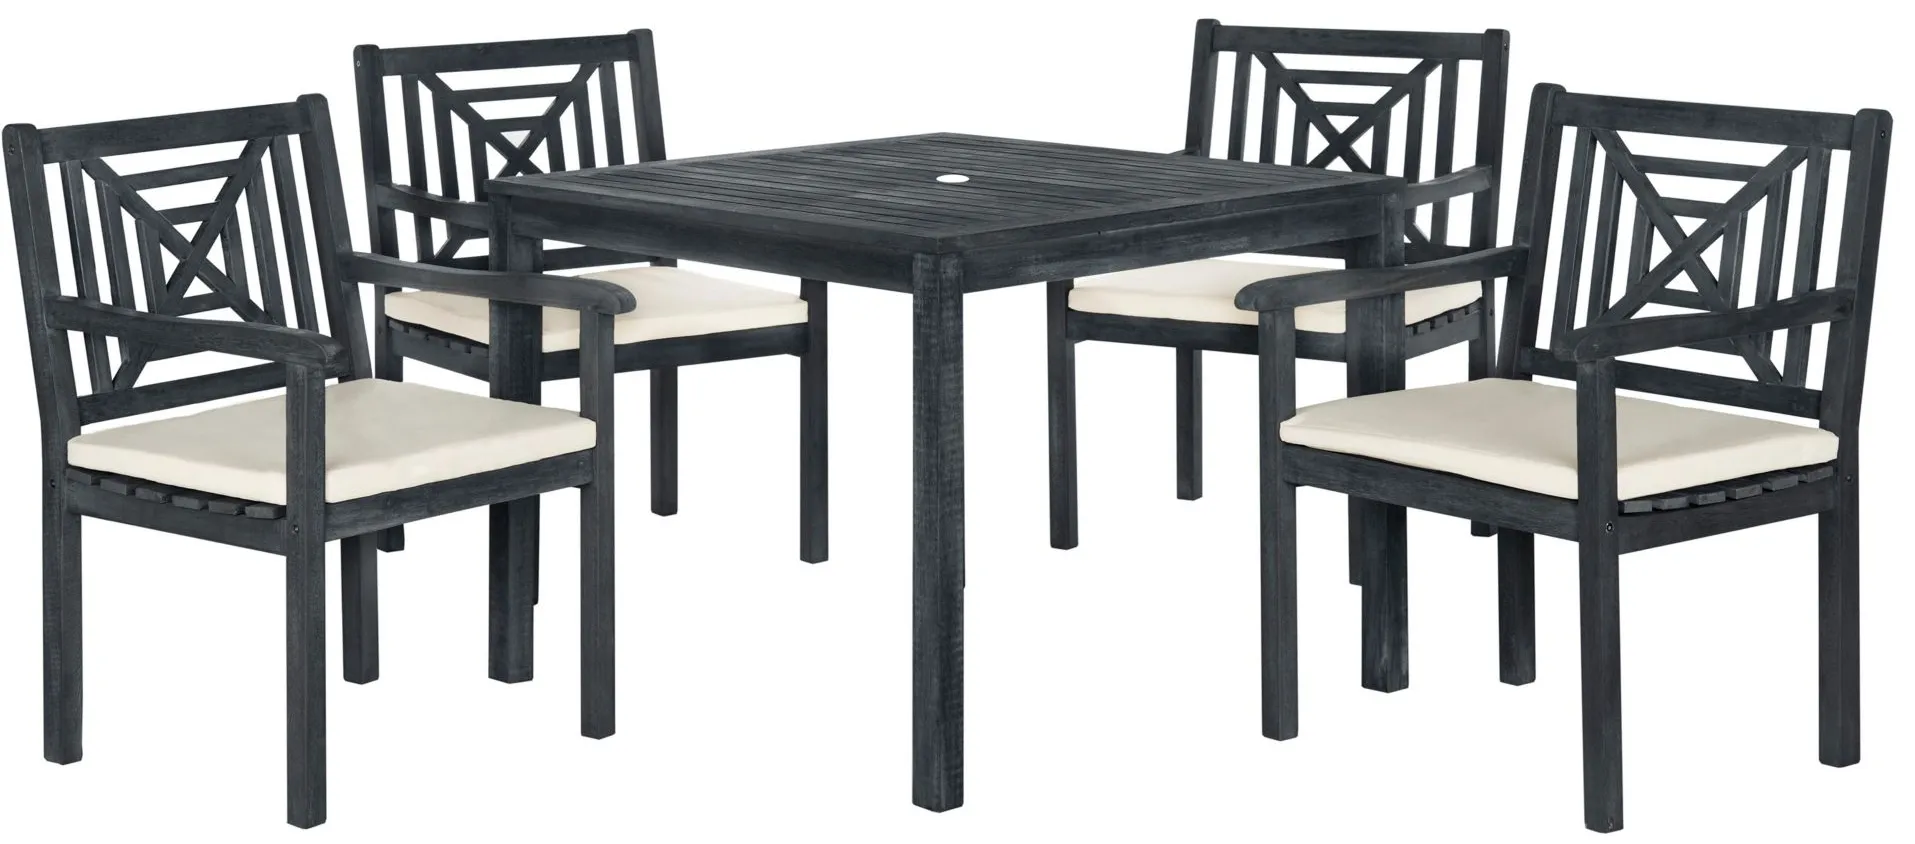 Brayson 5-pc. Outdoor Dining Set in Black by Safavieh